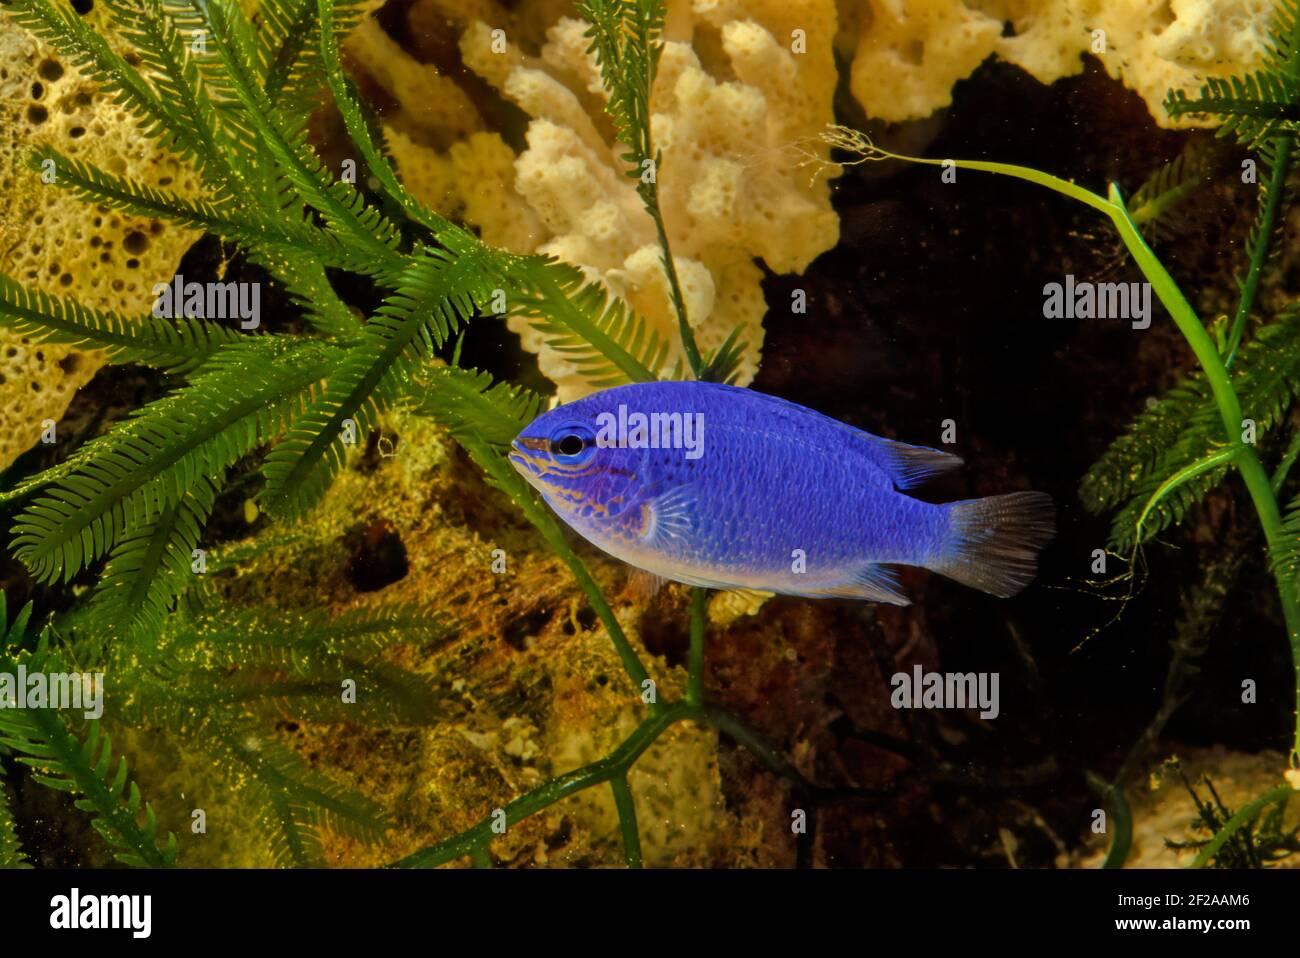 Chrysiptera cyanea is a species of damselfish native to the Indian and western Pacific Oceans. Common names include blue damselfish, blue demoiselle, Stock Photo